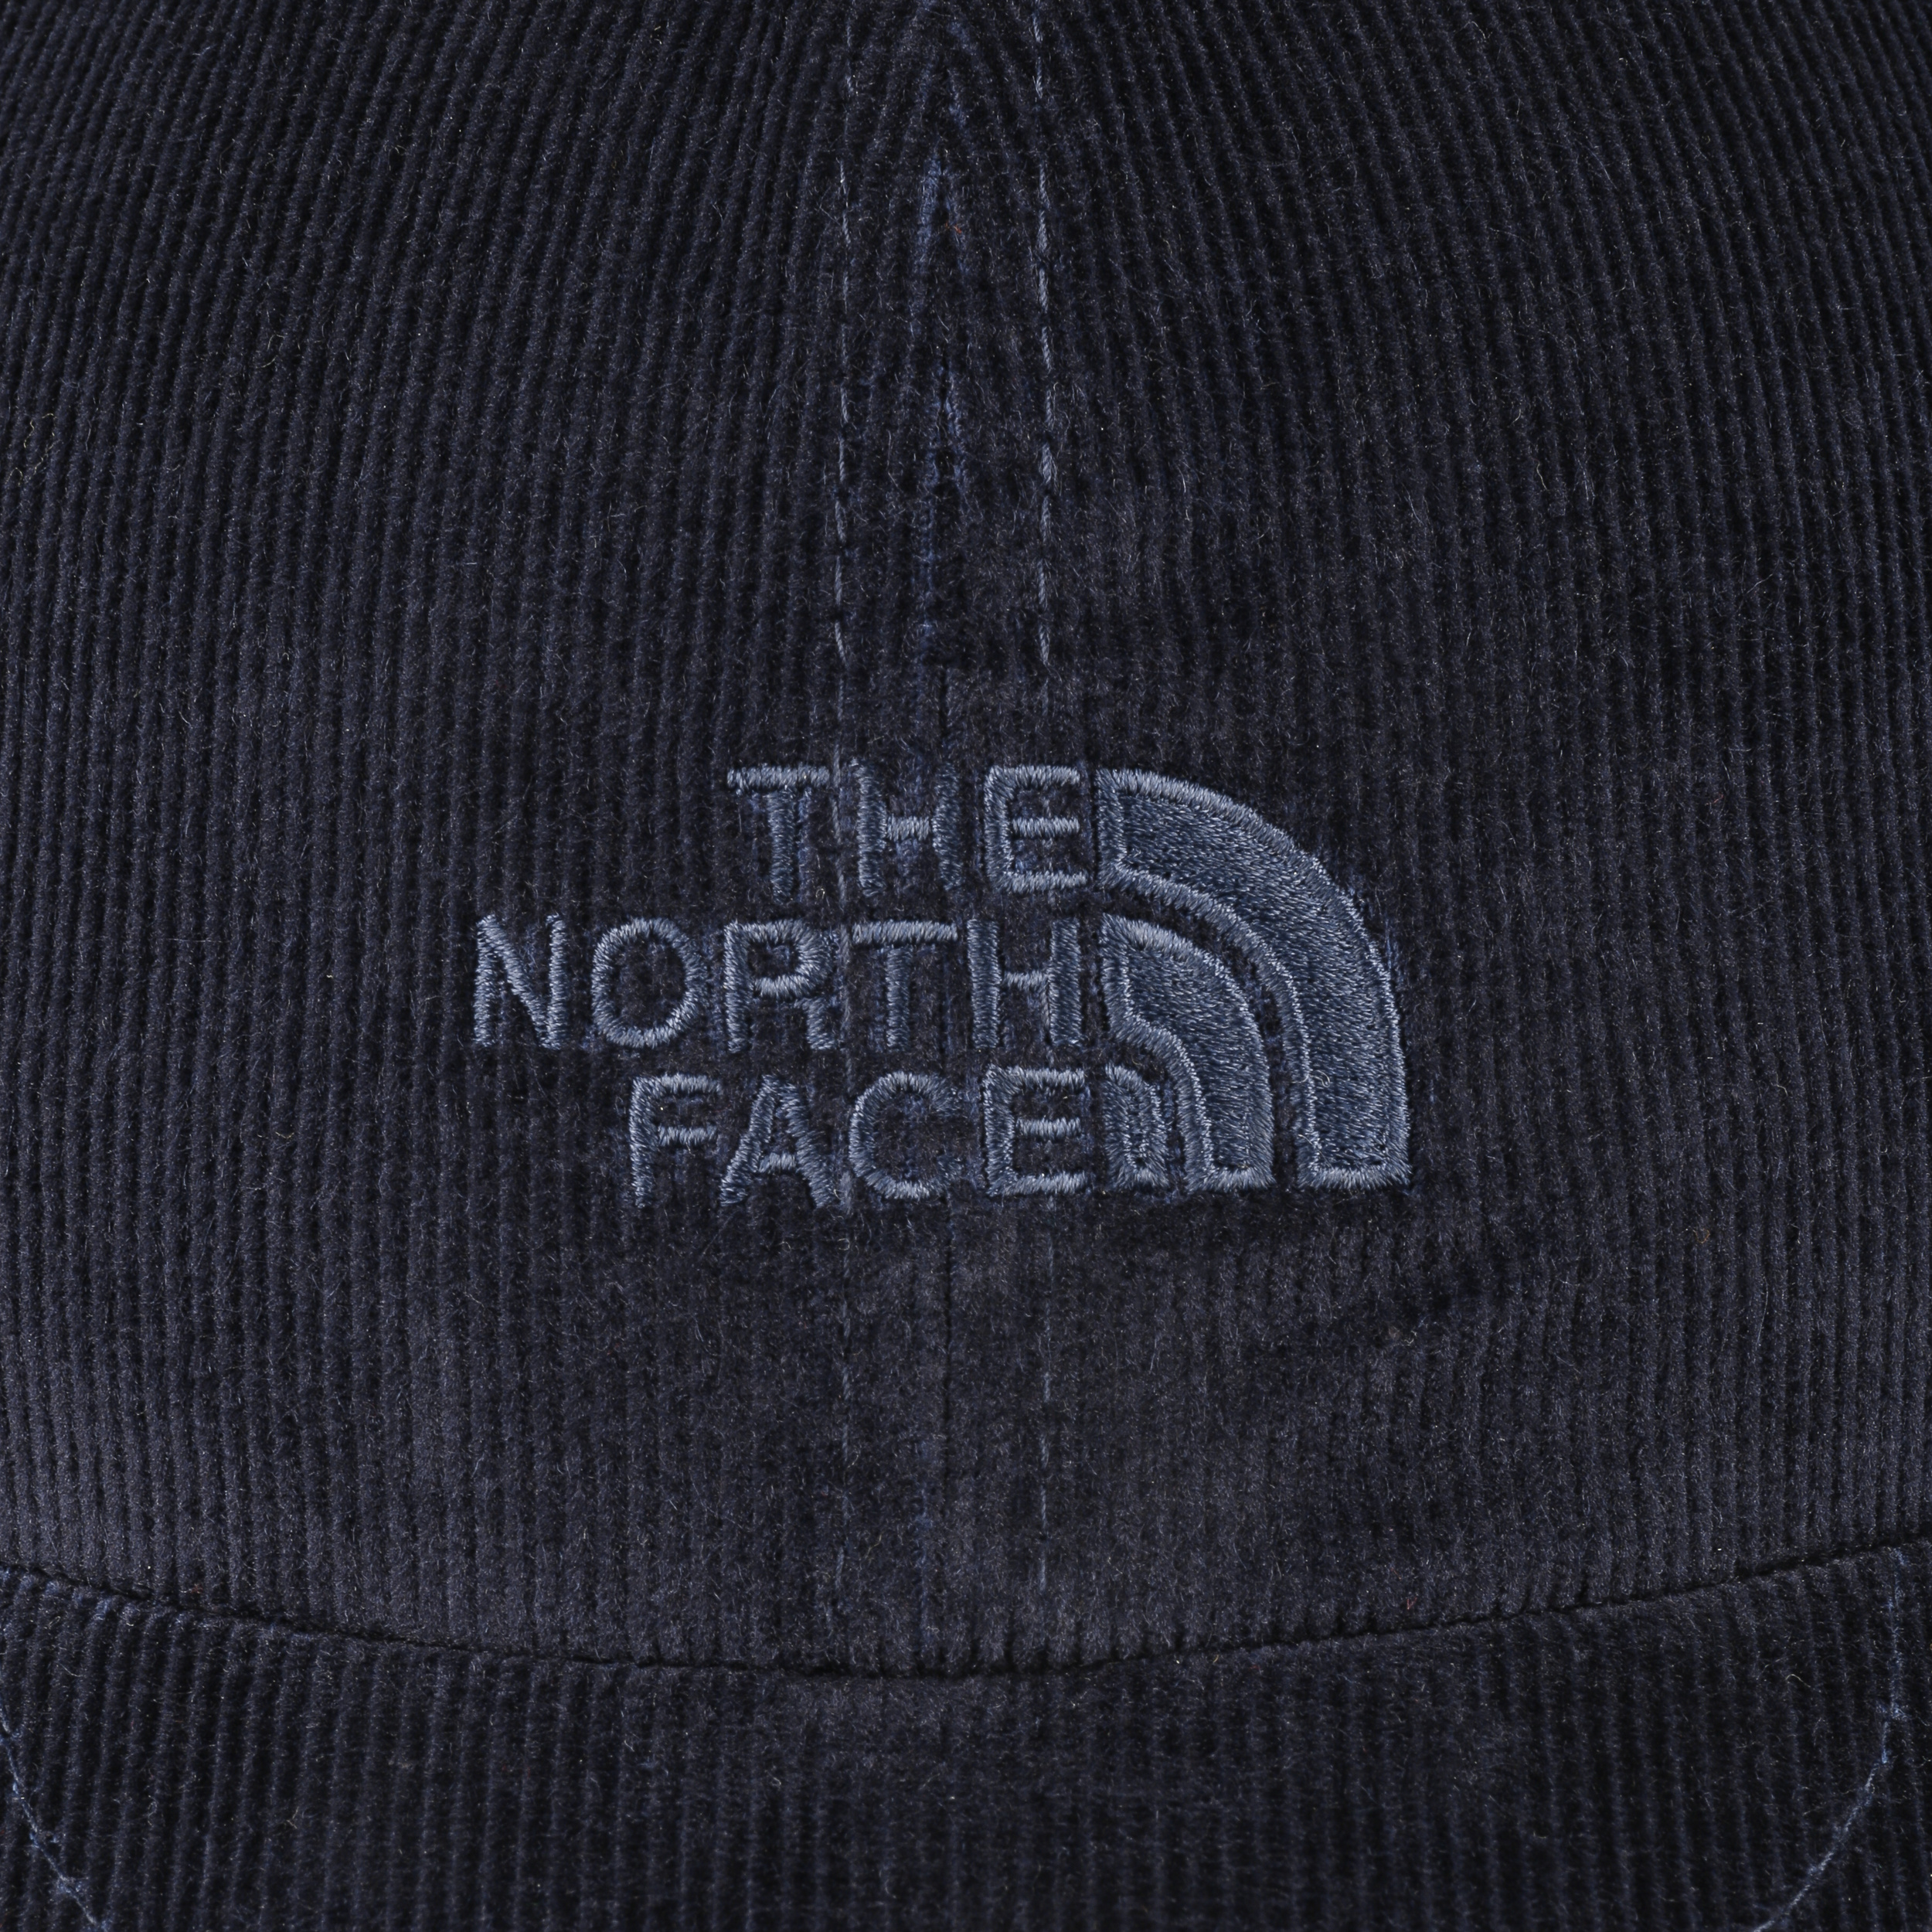 north face corduroy hat